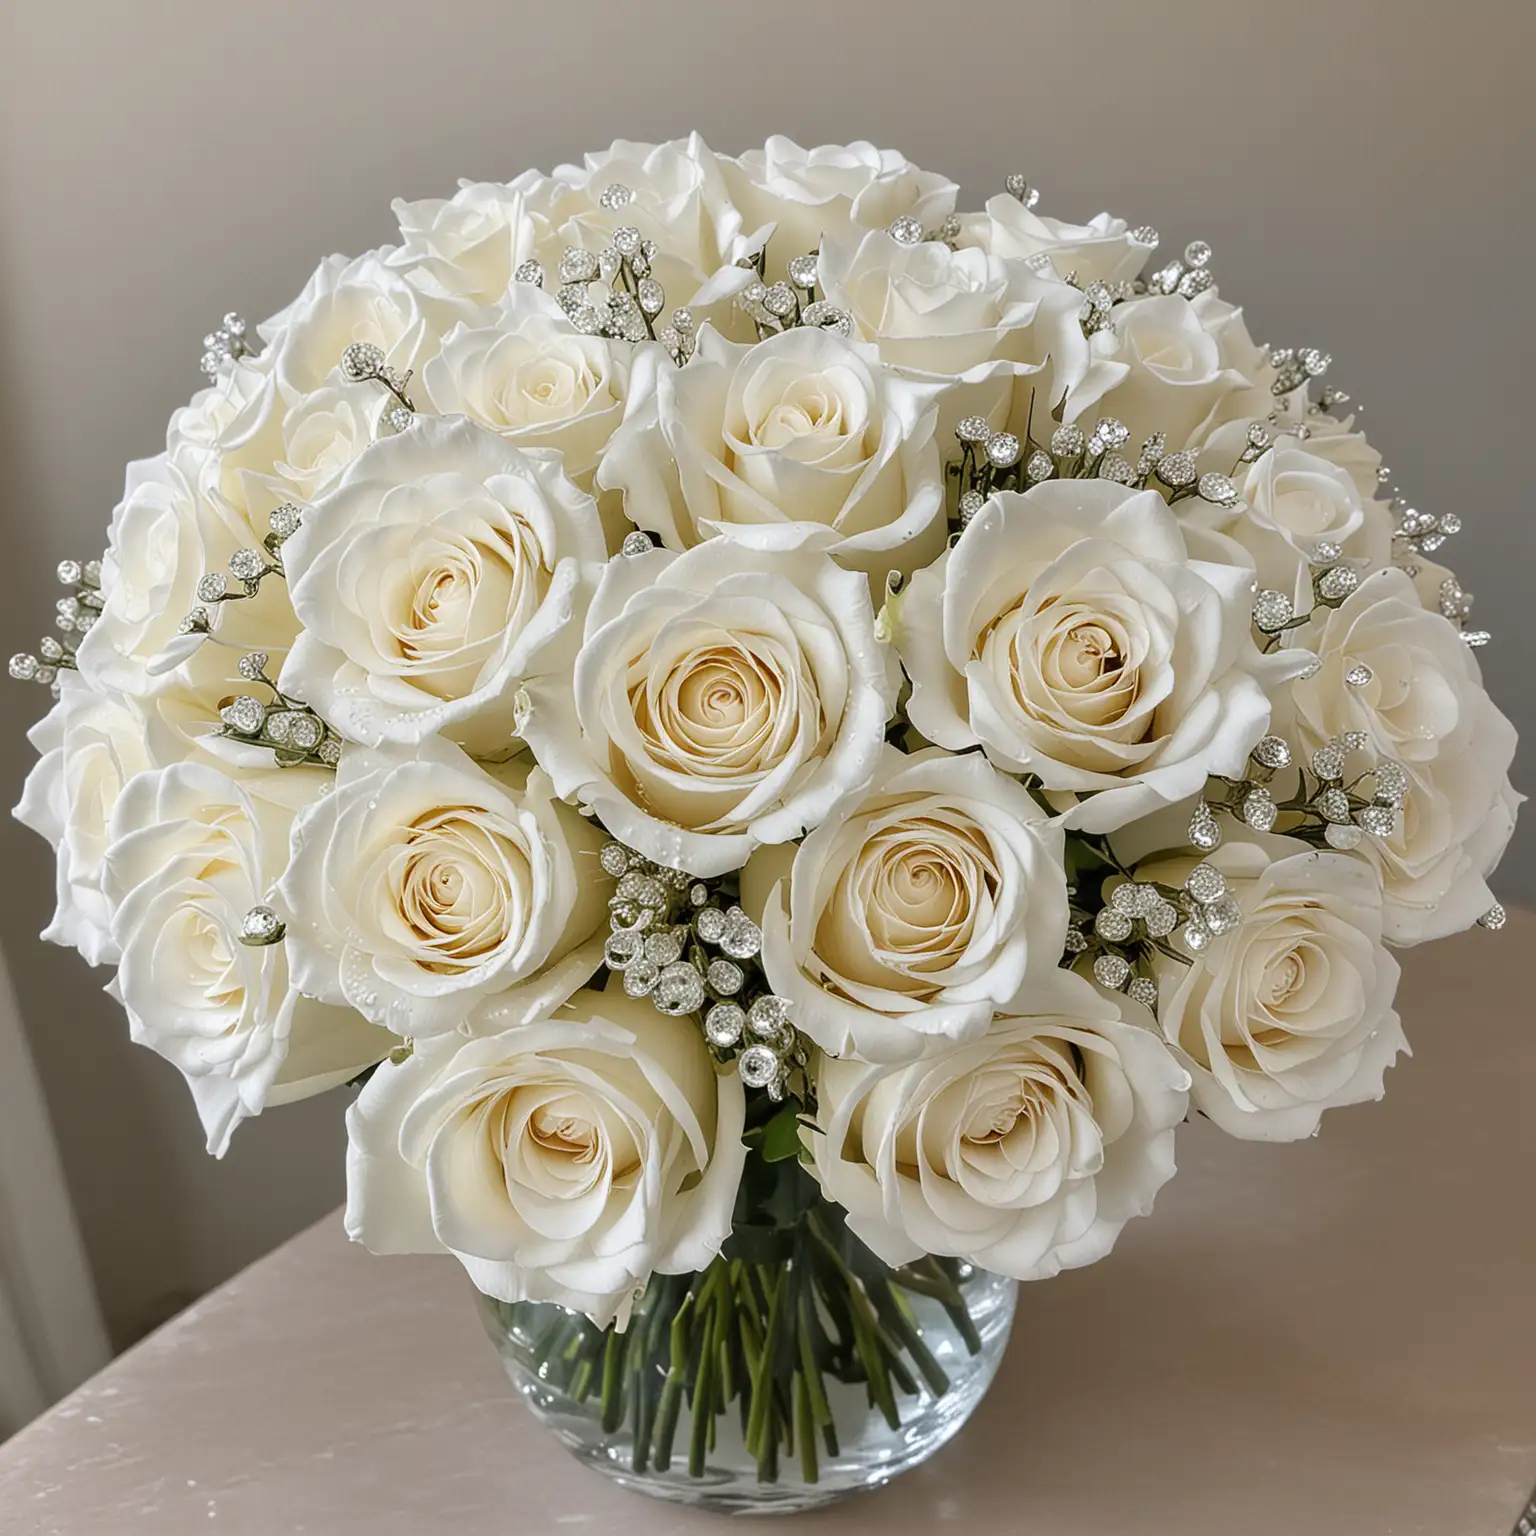 Glamorous White Roses with Glittering Petals